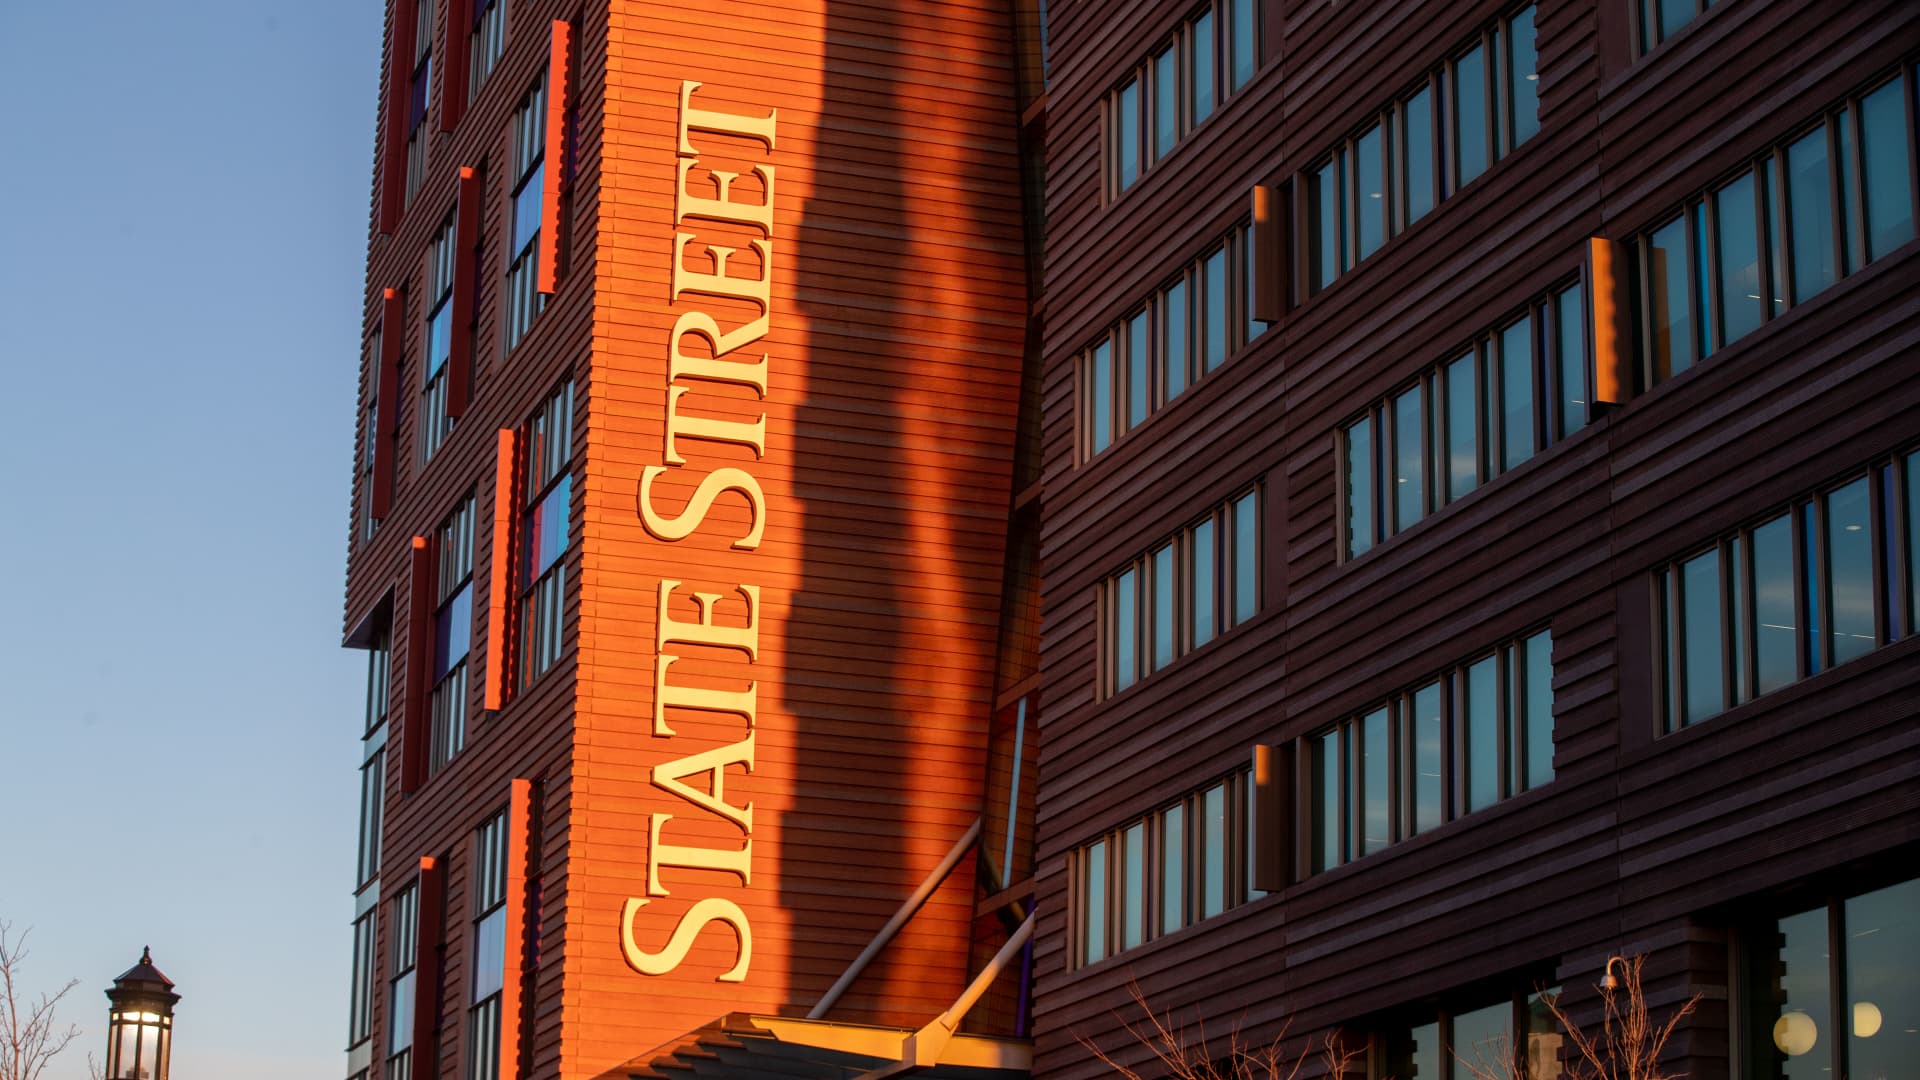 State Street is cutting fees on 10 funds worth more than $70 billion combined